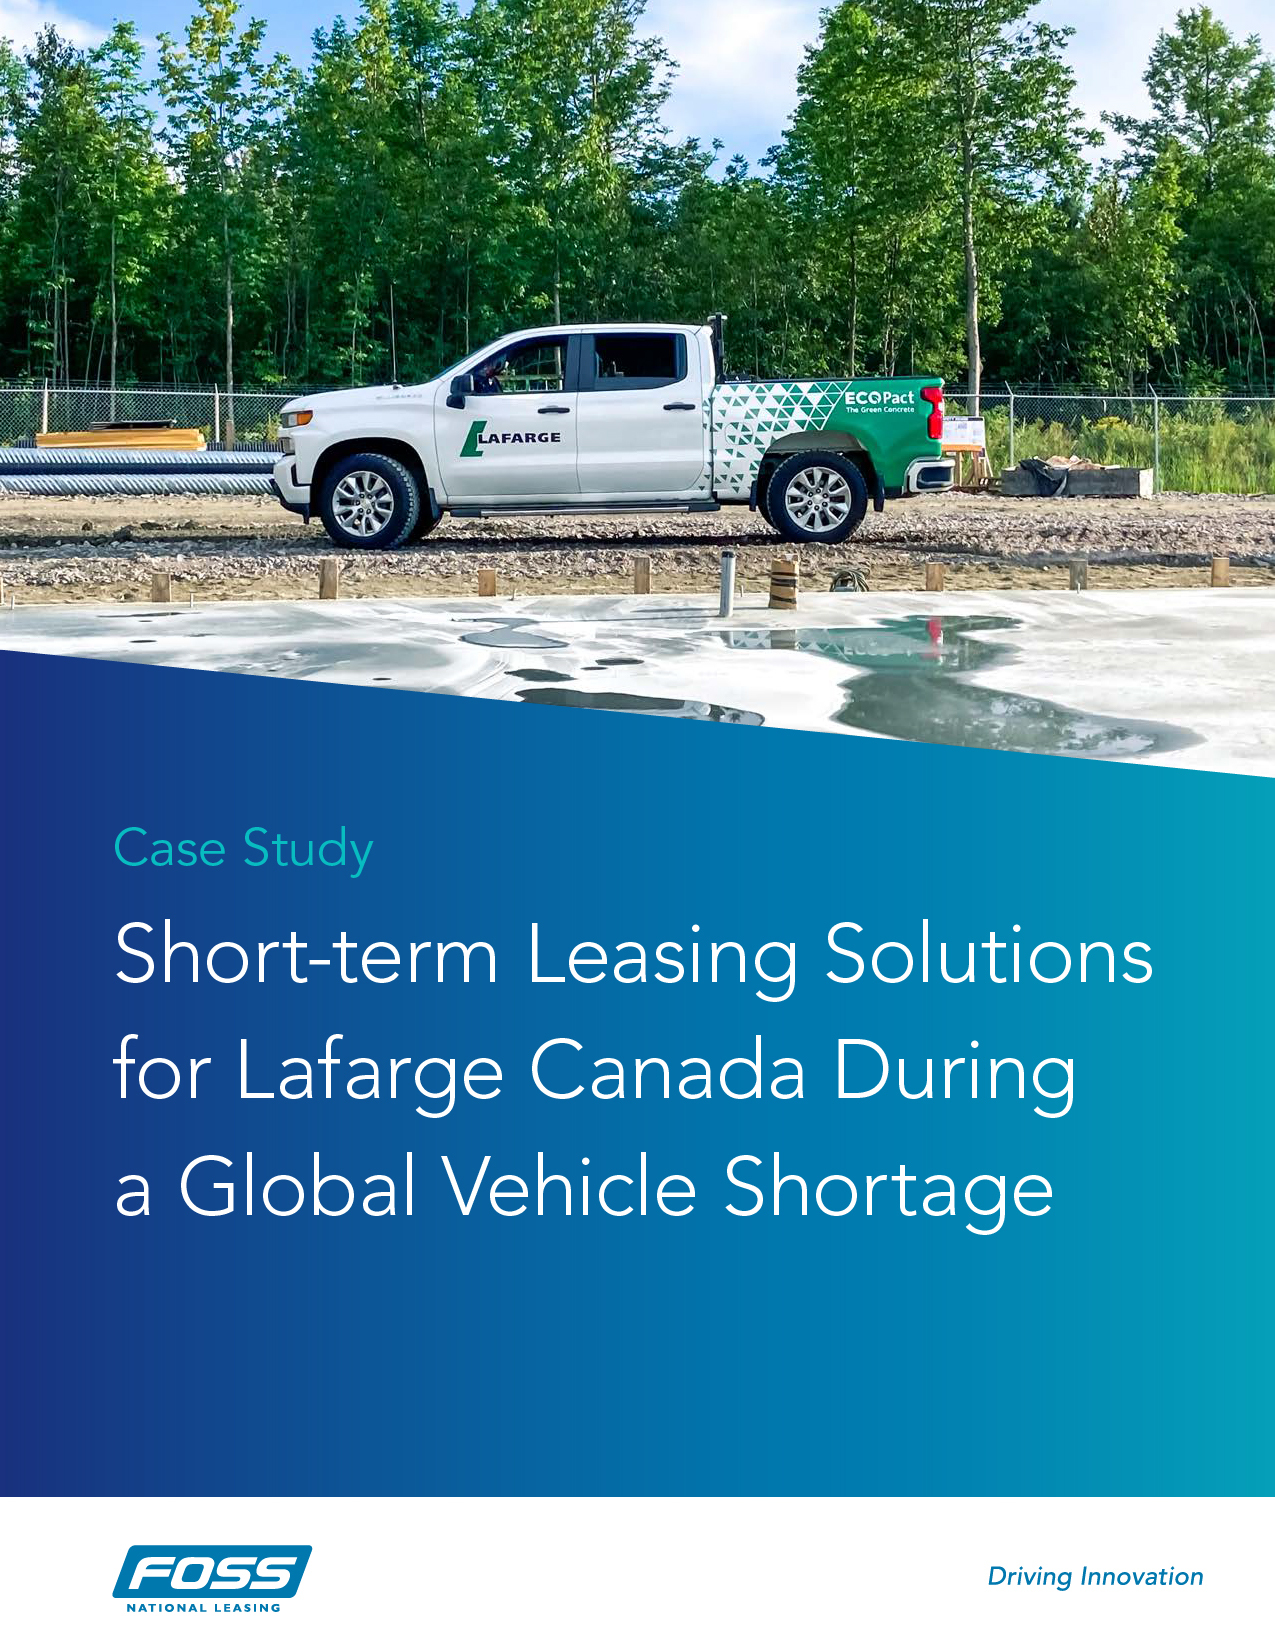 Foss and lafarge case study 